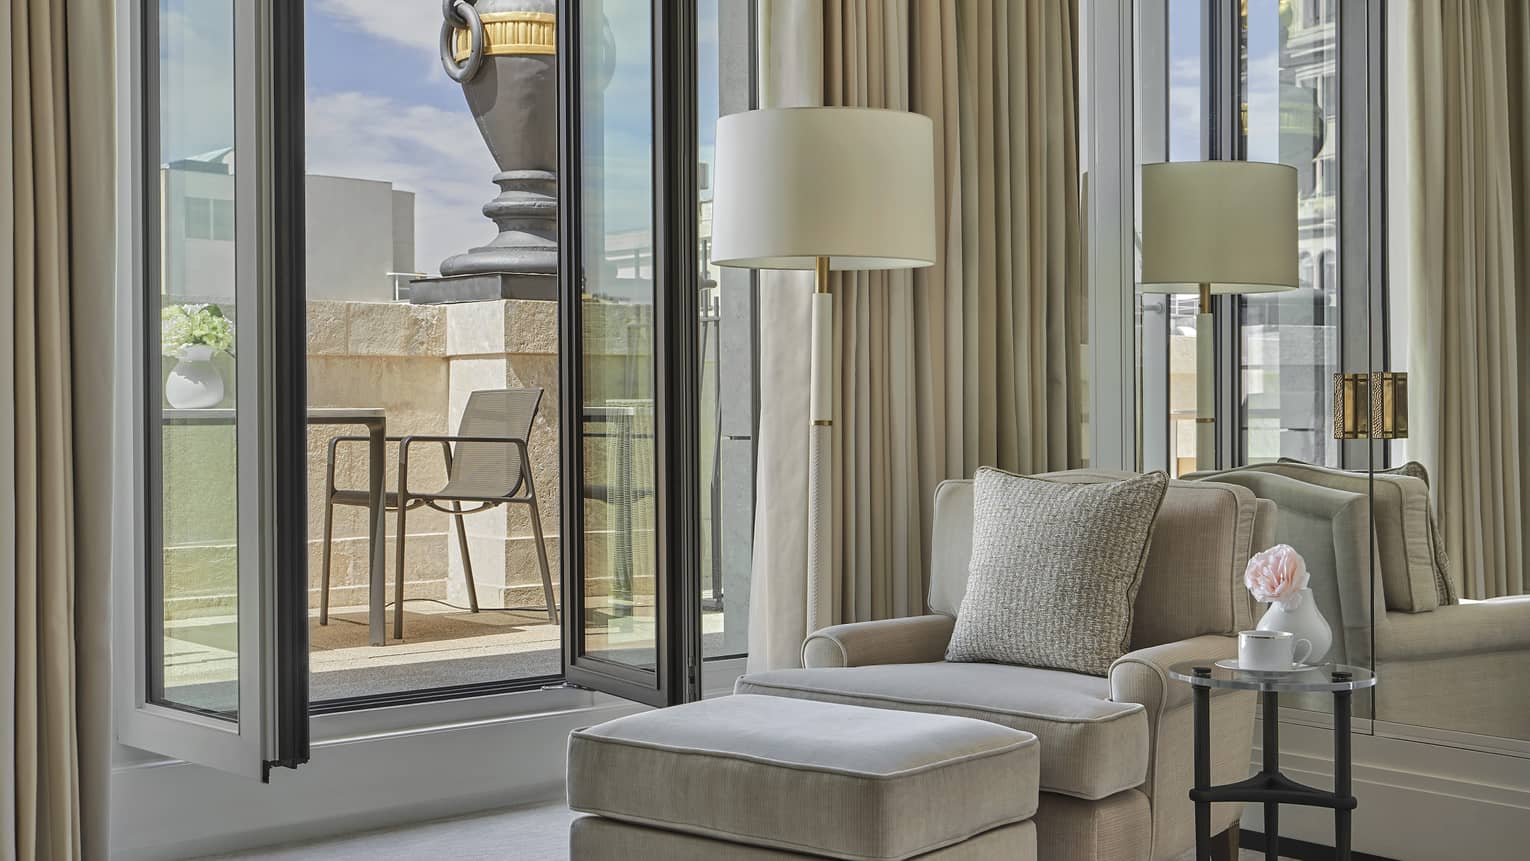 Guest suite with cream accent chair and matching ottoman, floor lamp, floor-to-ceiling window with cream curtains, glass door opening onto terrace